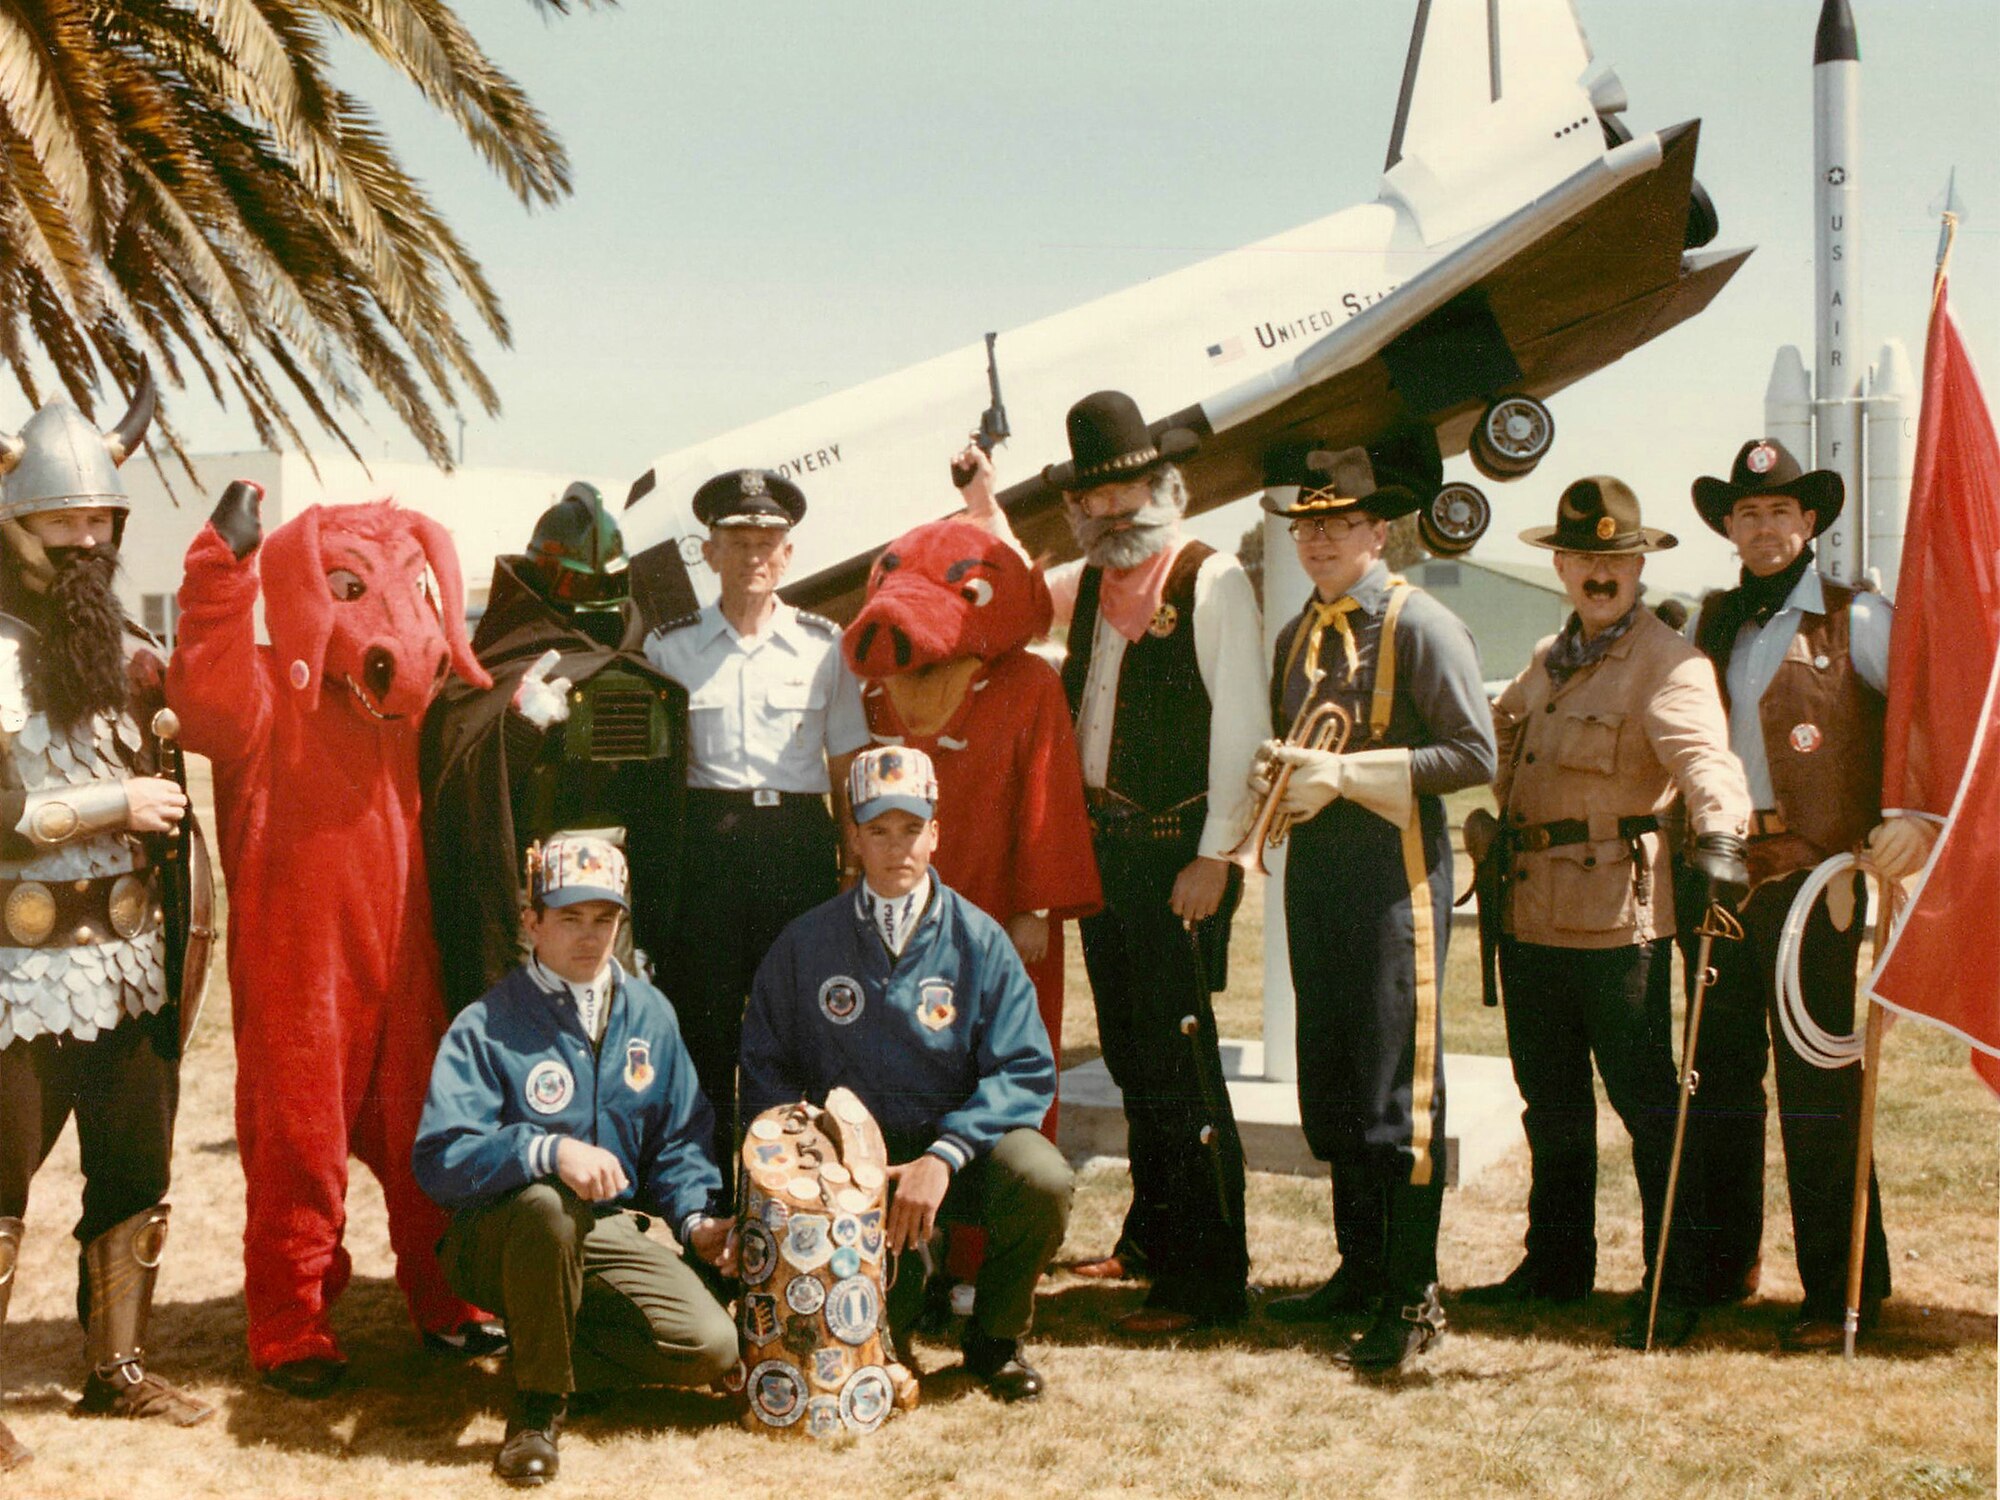 The 341st Strategic Missile Wing’s mascot, the Wrangler, far right, stands with seven other Minuteman and Titan missile wing team mascots around General Bennie L. Davis, commander-in-chief of Strategic Air Command, at the 1985 SAC Missile Combat Competition at Vandenberg Air Force Base, Calif. Malmstrom Air Force Base’s team was called “The Wranglers, “The First Aces” and “The Ace in the Hole Gang” that year. The other mascots represent 321st SMW, Grand Forks AFB, N.D.; 351st SMW, Whiteman AFB, Mo.; 381st SMW, McConnell AFB, Kan.; 308th SMW, Little Rock AFB, Ark.; 44th SMW, Ellsworth AFB, S.D.; 90th SMW, F.E. Warren AFB, Wyo.; and 91st SMW, Minot AFB, N.D. By 1994 the 90th Missile Wing’s mascot changed from a cavalry trooper to the Wrangler. (Photo courtesy of 341st MW Historian Office)